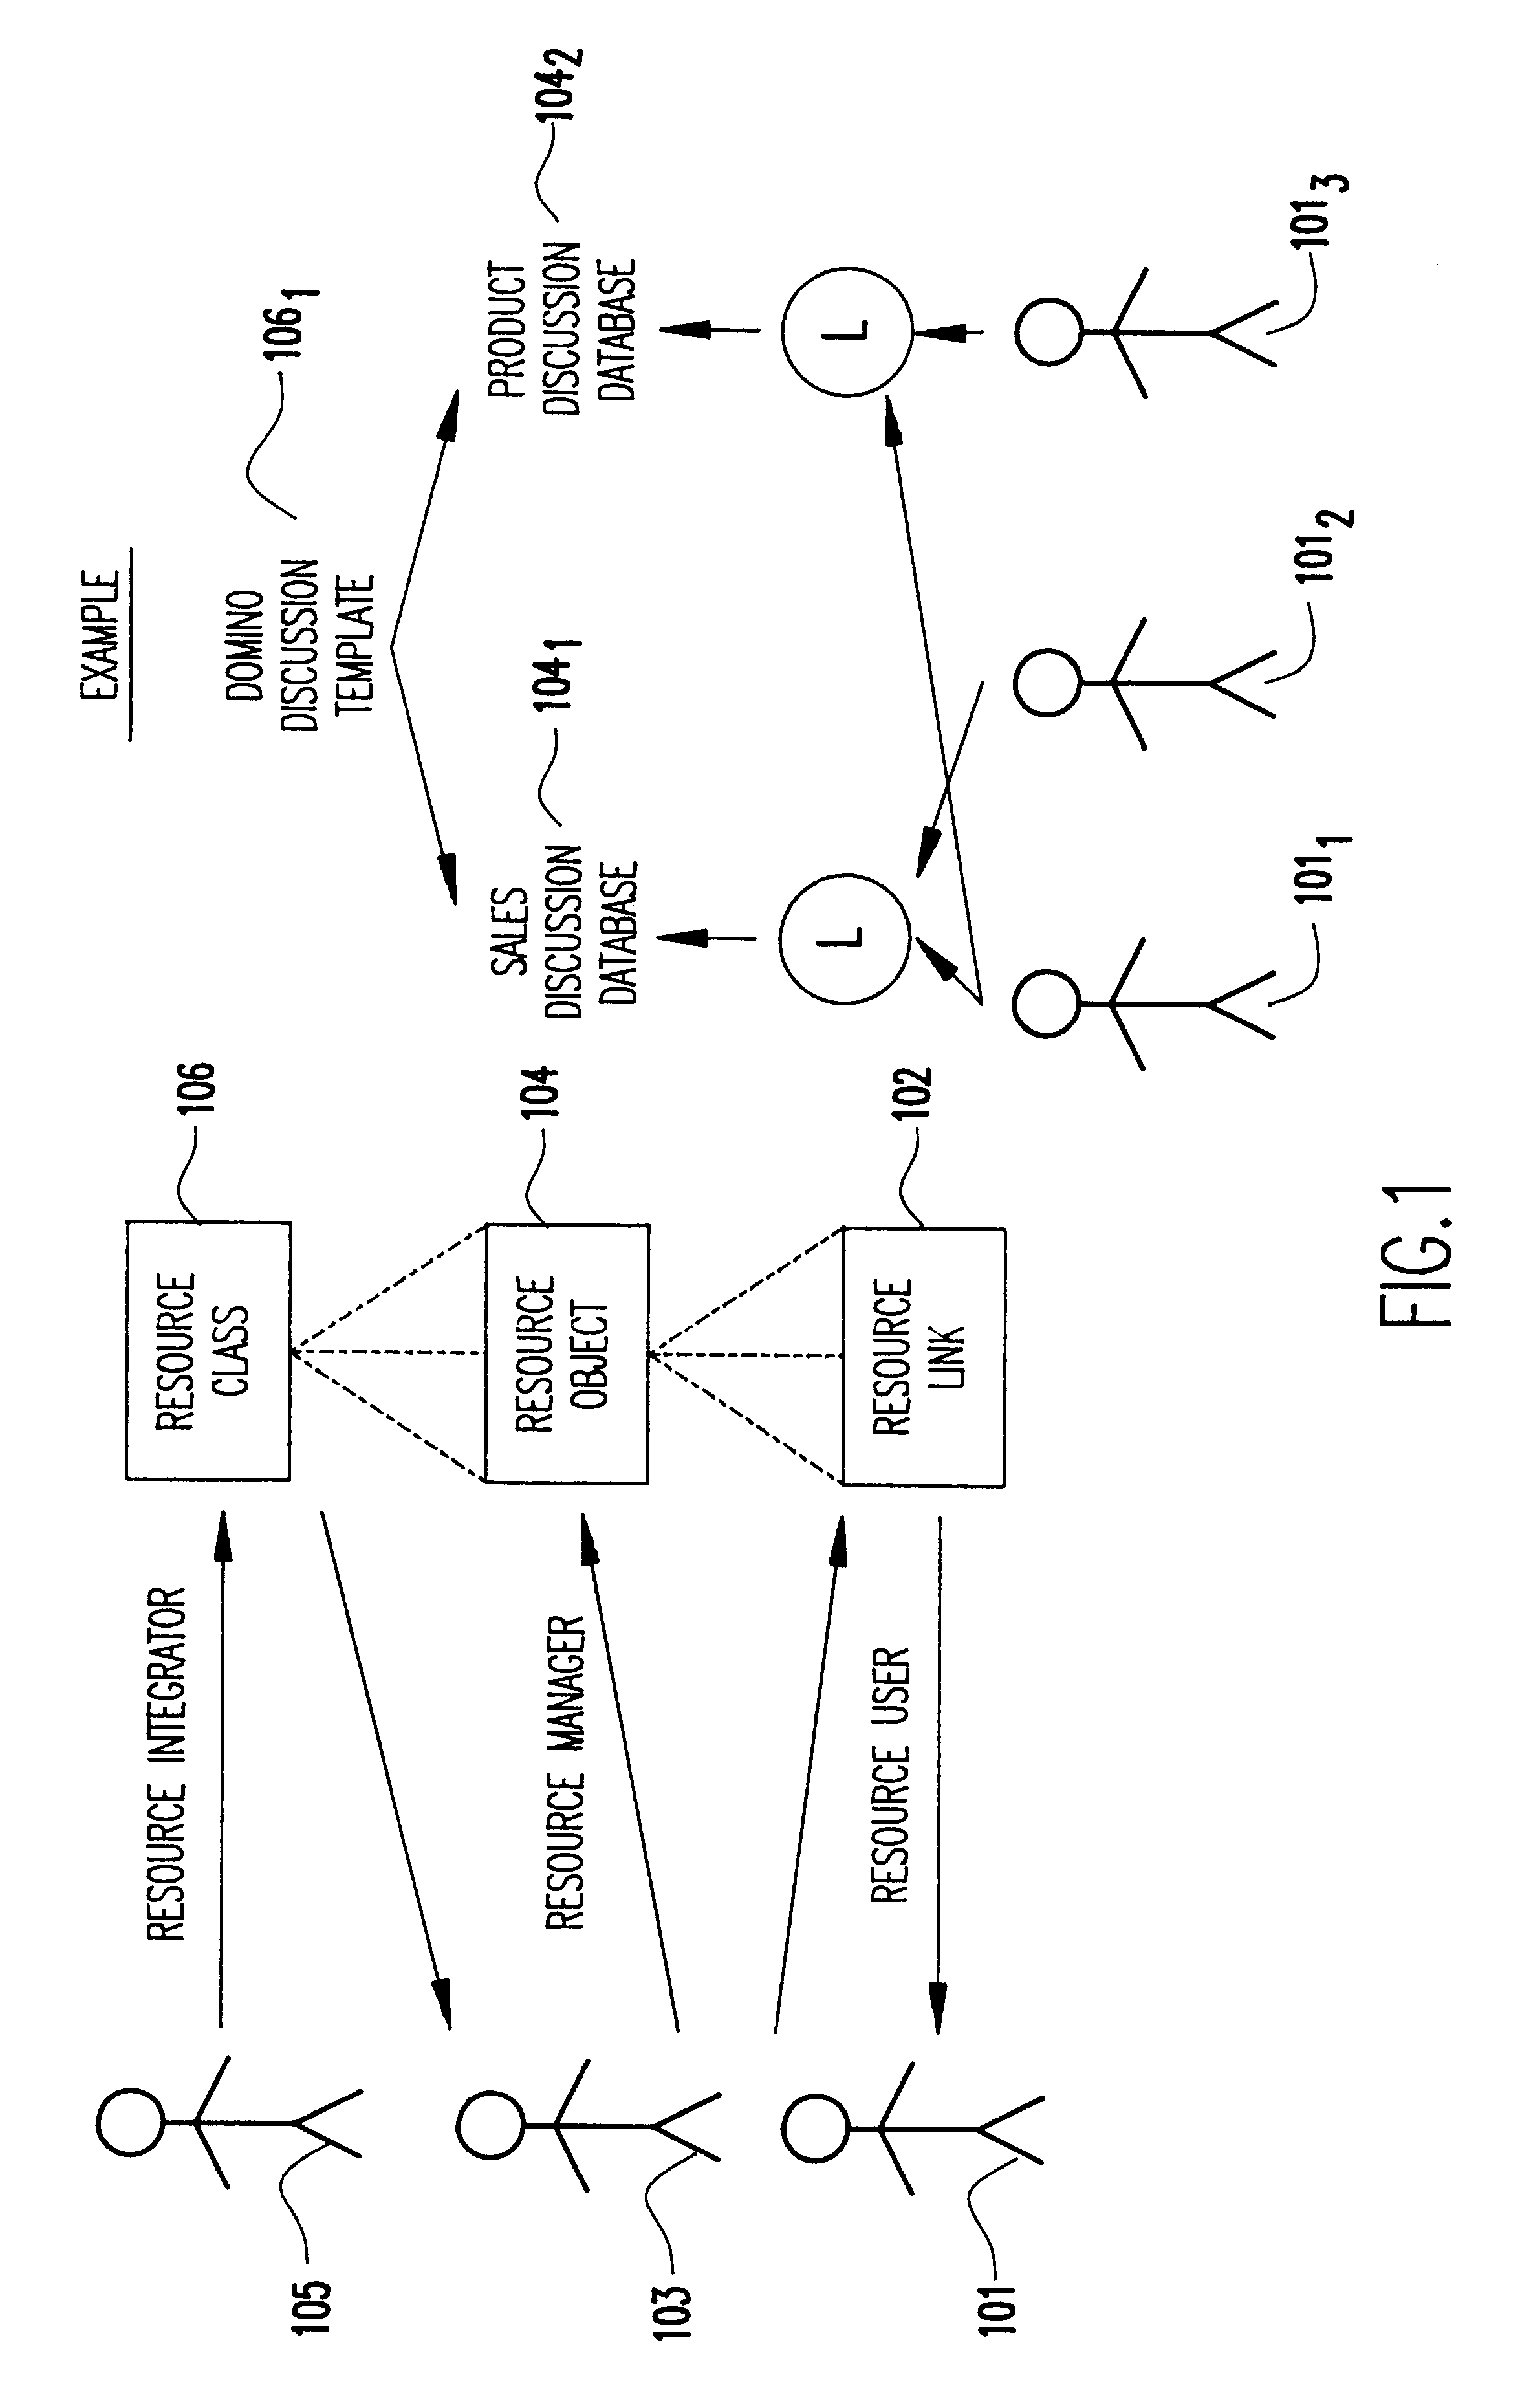 System and method to provide secure navigation to resources on the internet